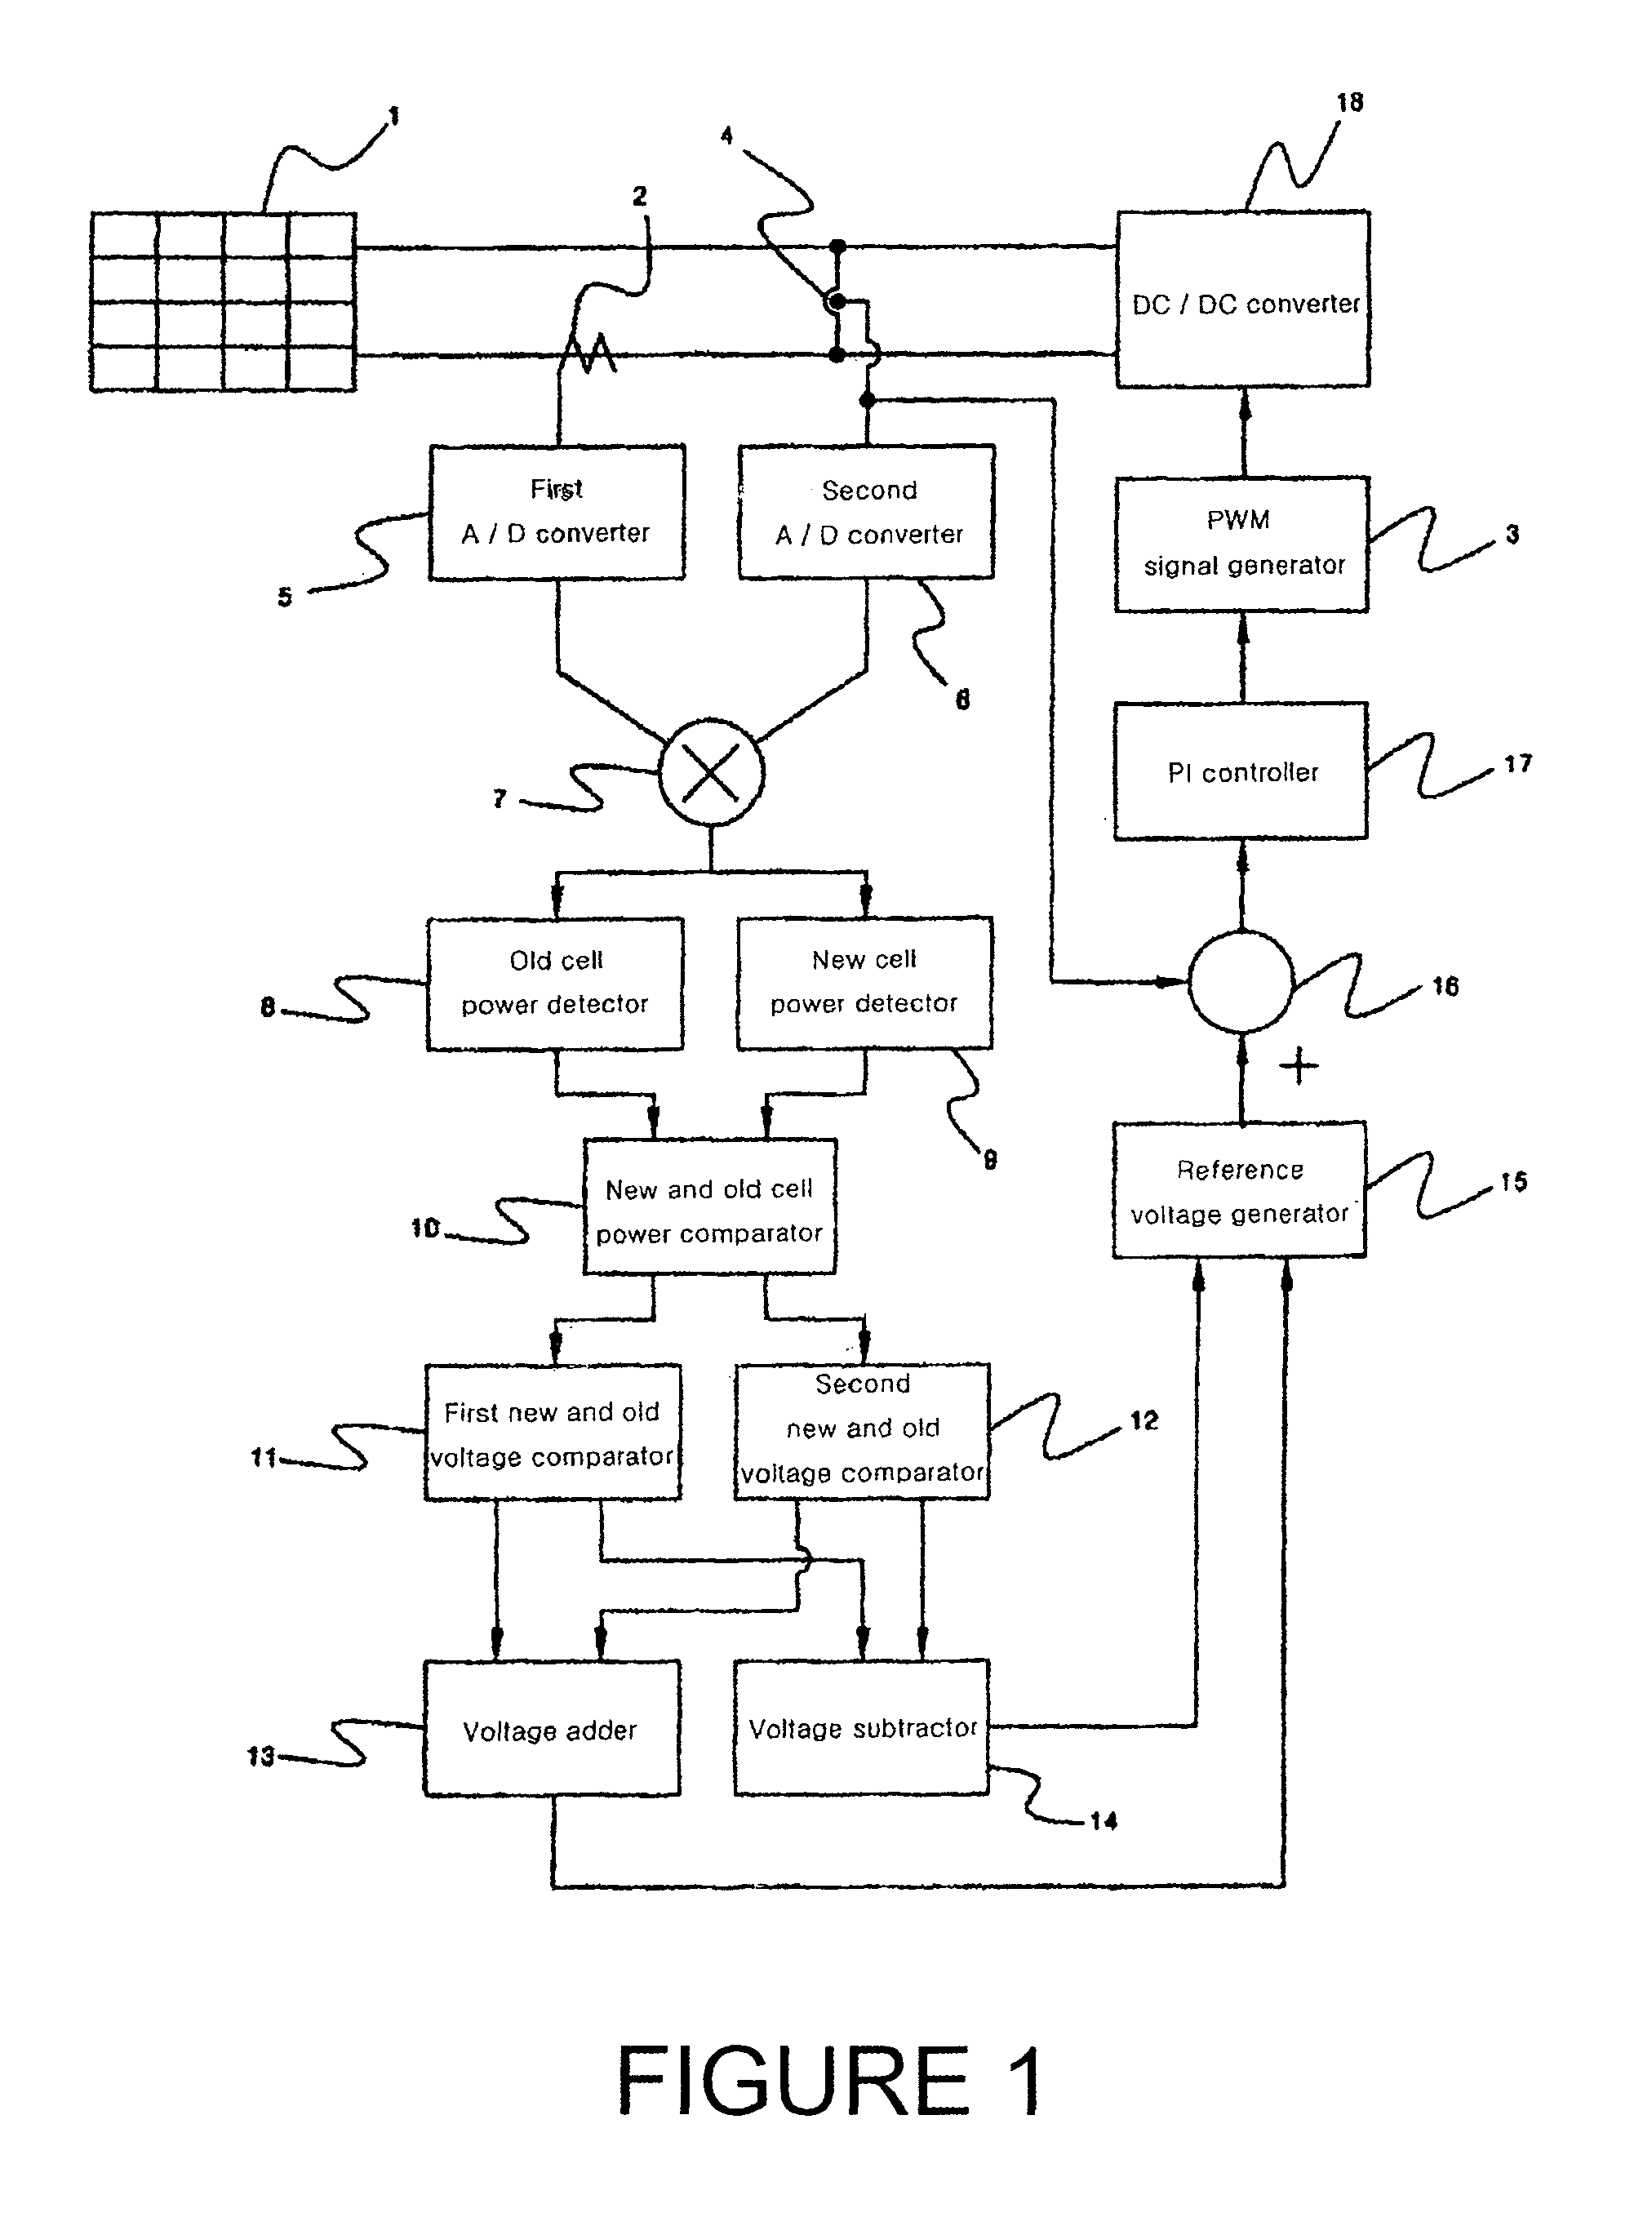 Controlling apparatus of a power converter of single-phase current for photovoltaic generation system